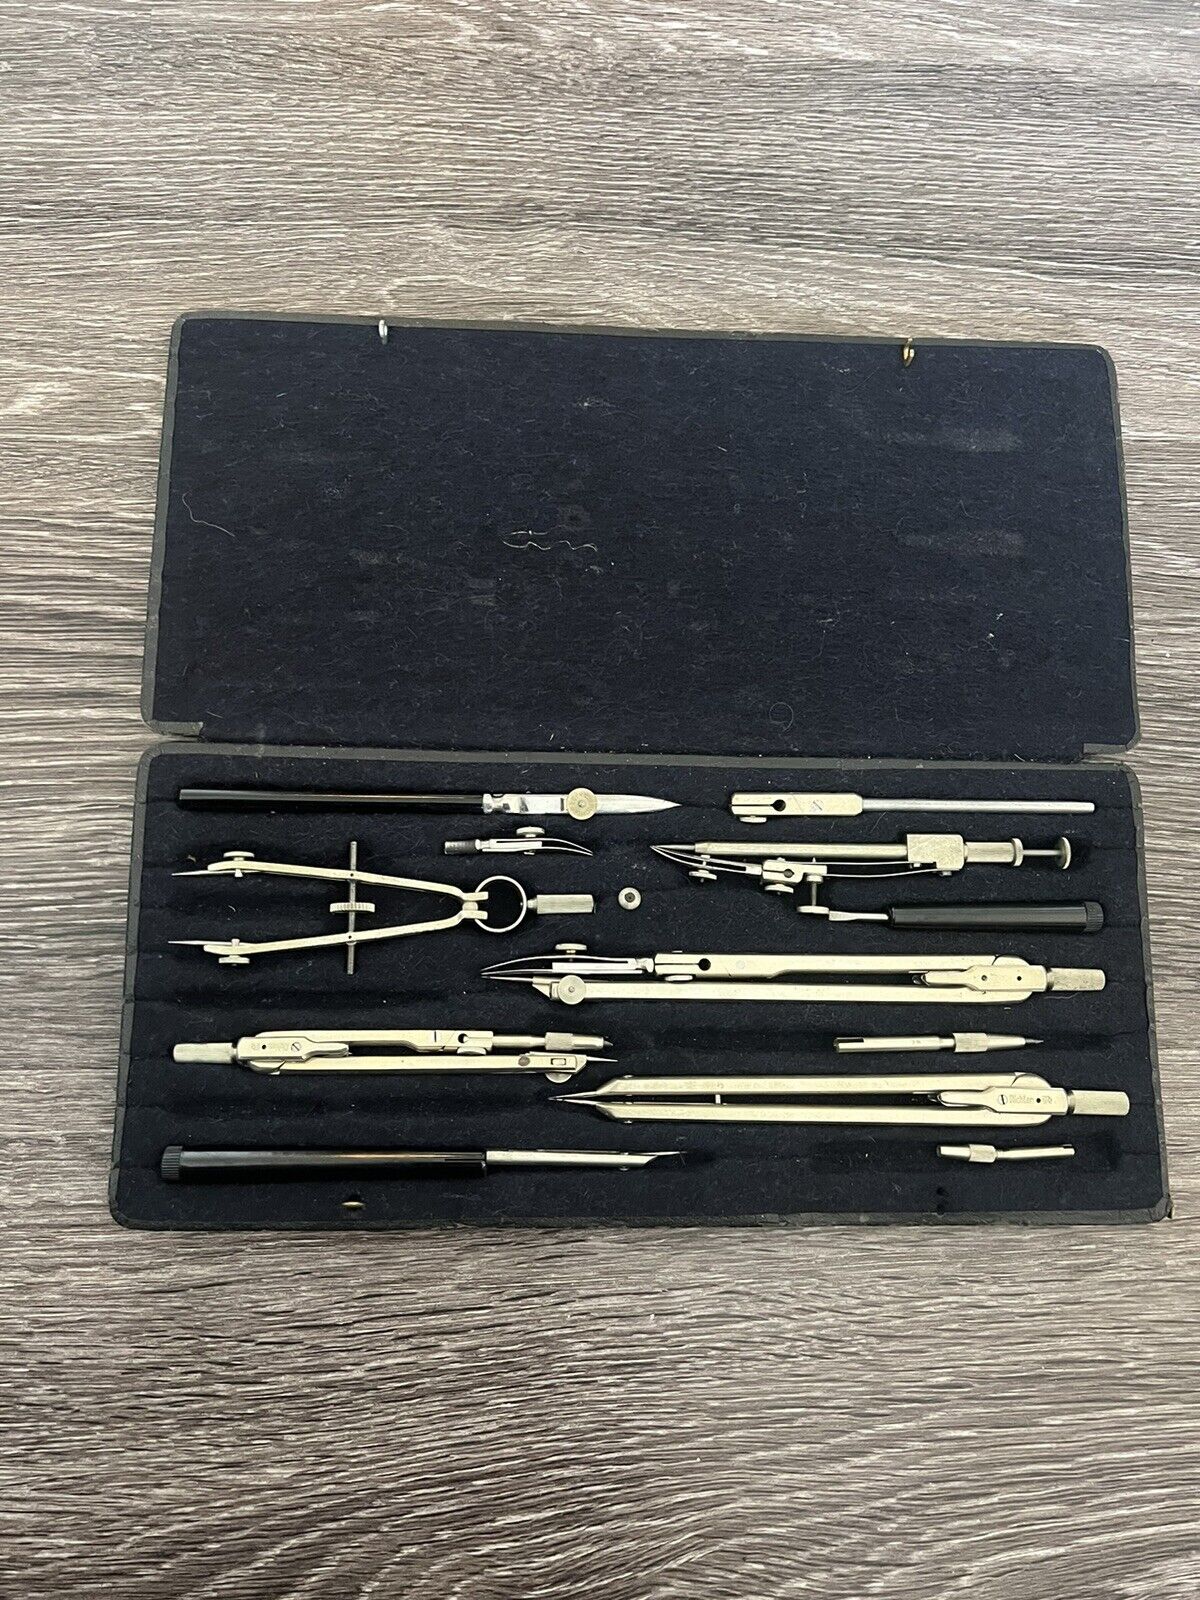 Vintage Premium Engineering-Germany- E.O Richter & Co Precision Drafting Set